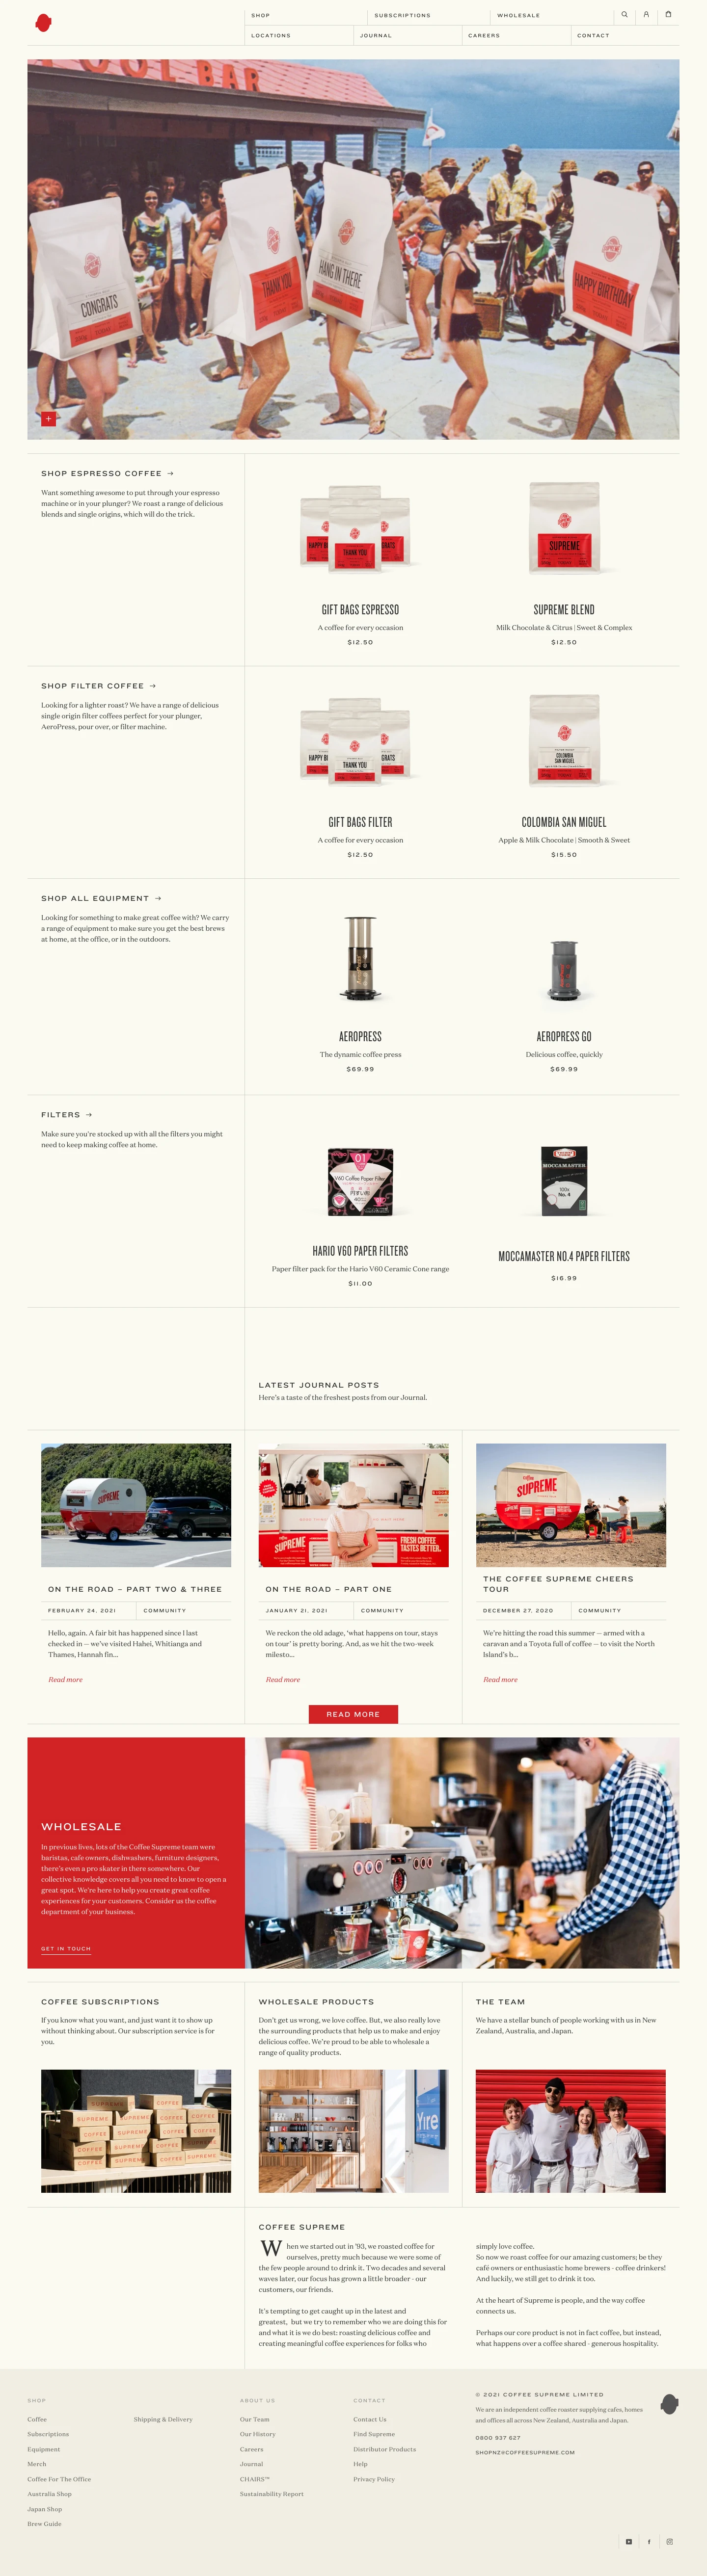 Coffee Supreme Landing Page Example: Fresh coffee delivered wherever you are. The Coffee Supreme online shop carries a wide range of freshly roasted specialty coffee and brew gear for both home and the office. Delivering worldwide.